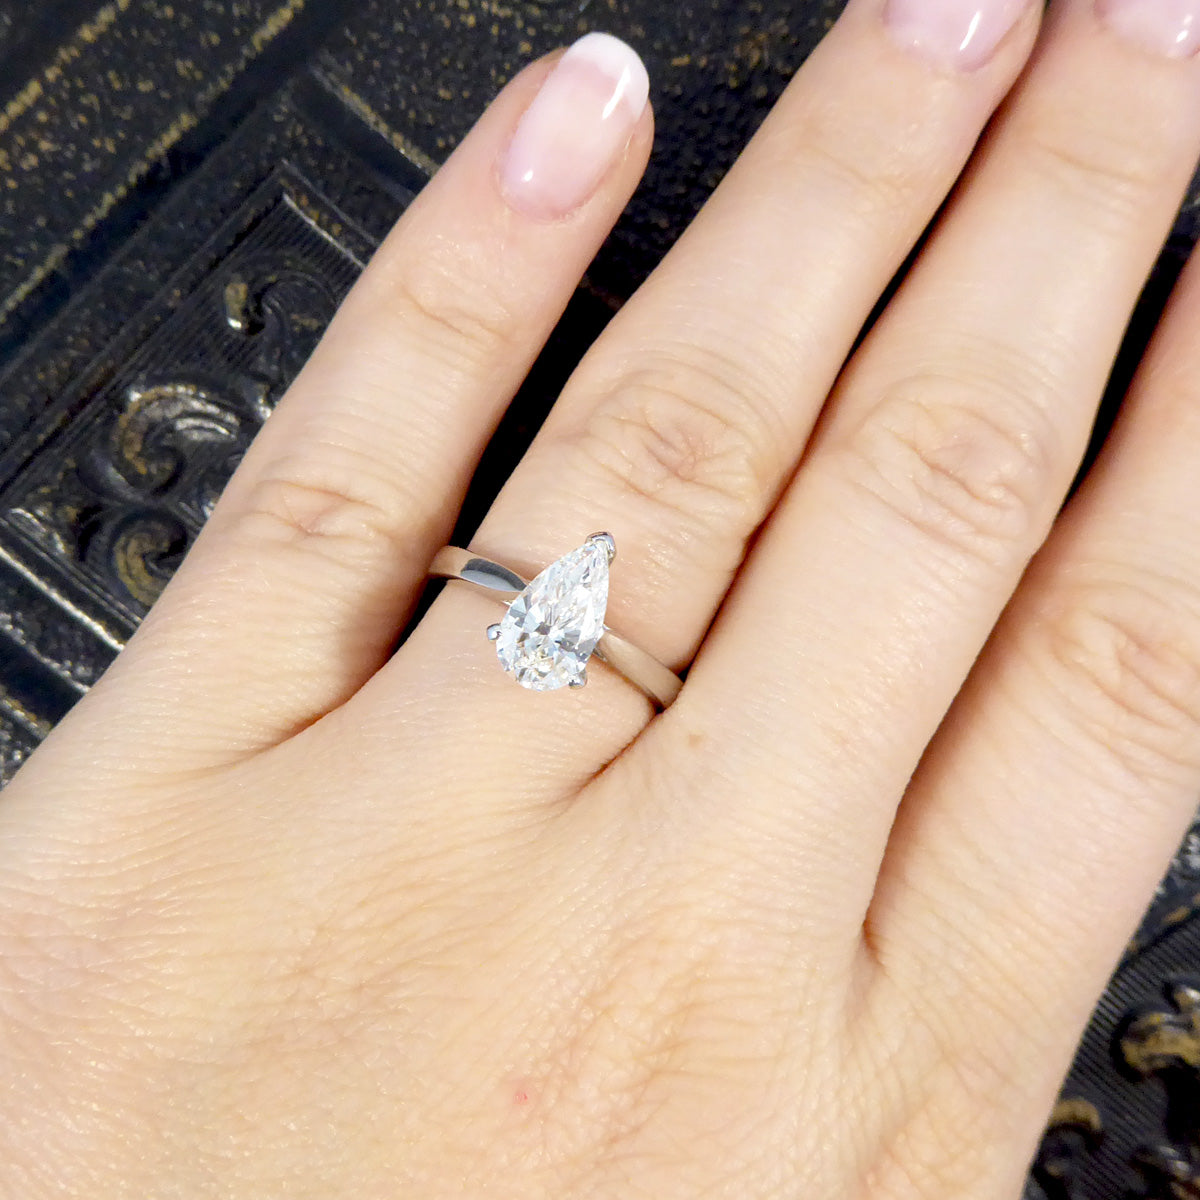 Solitaire Engagement Ring with 1.26ct Pear Cut Diamond in 18ct White Gold